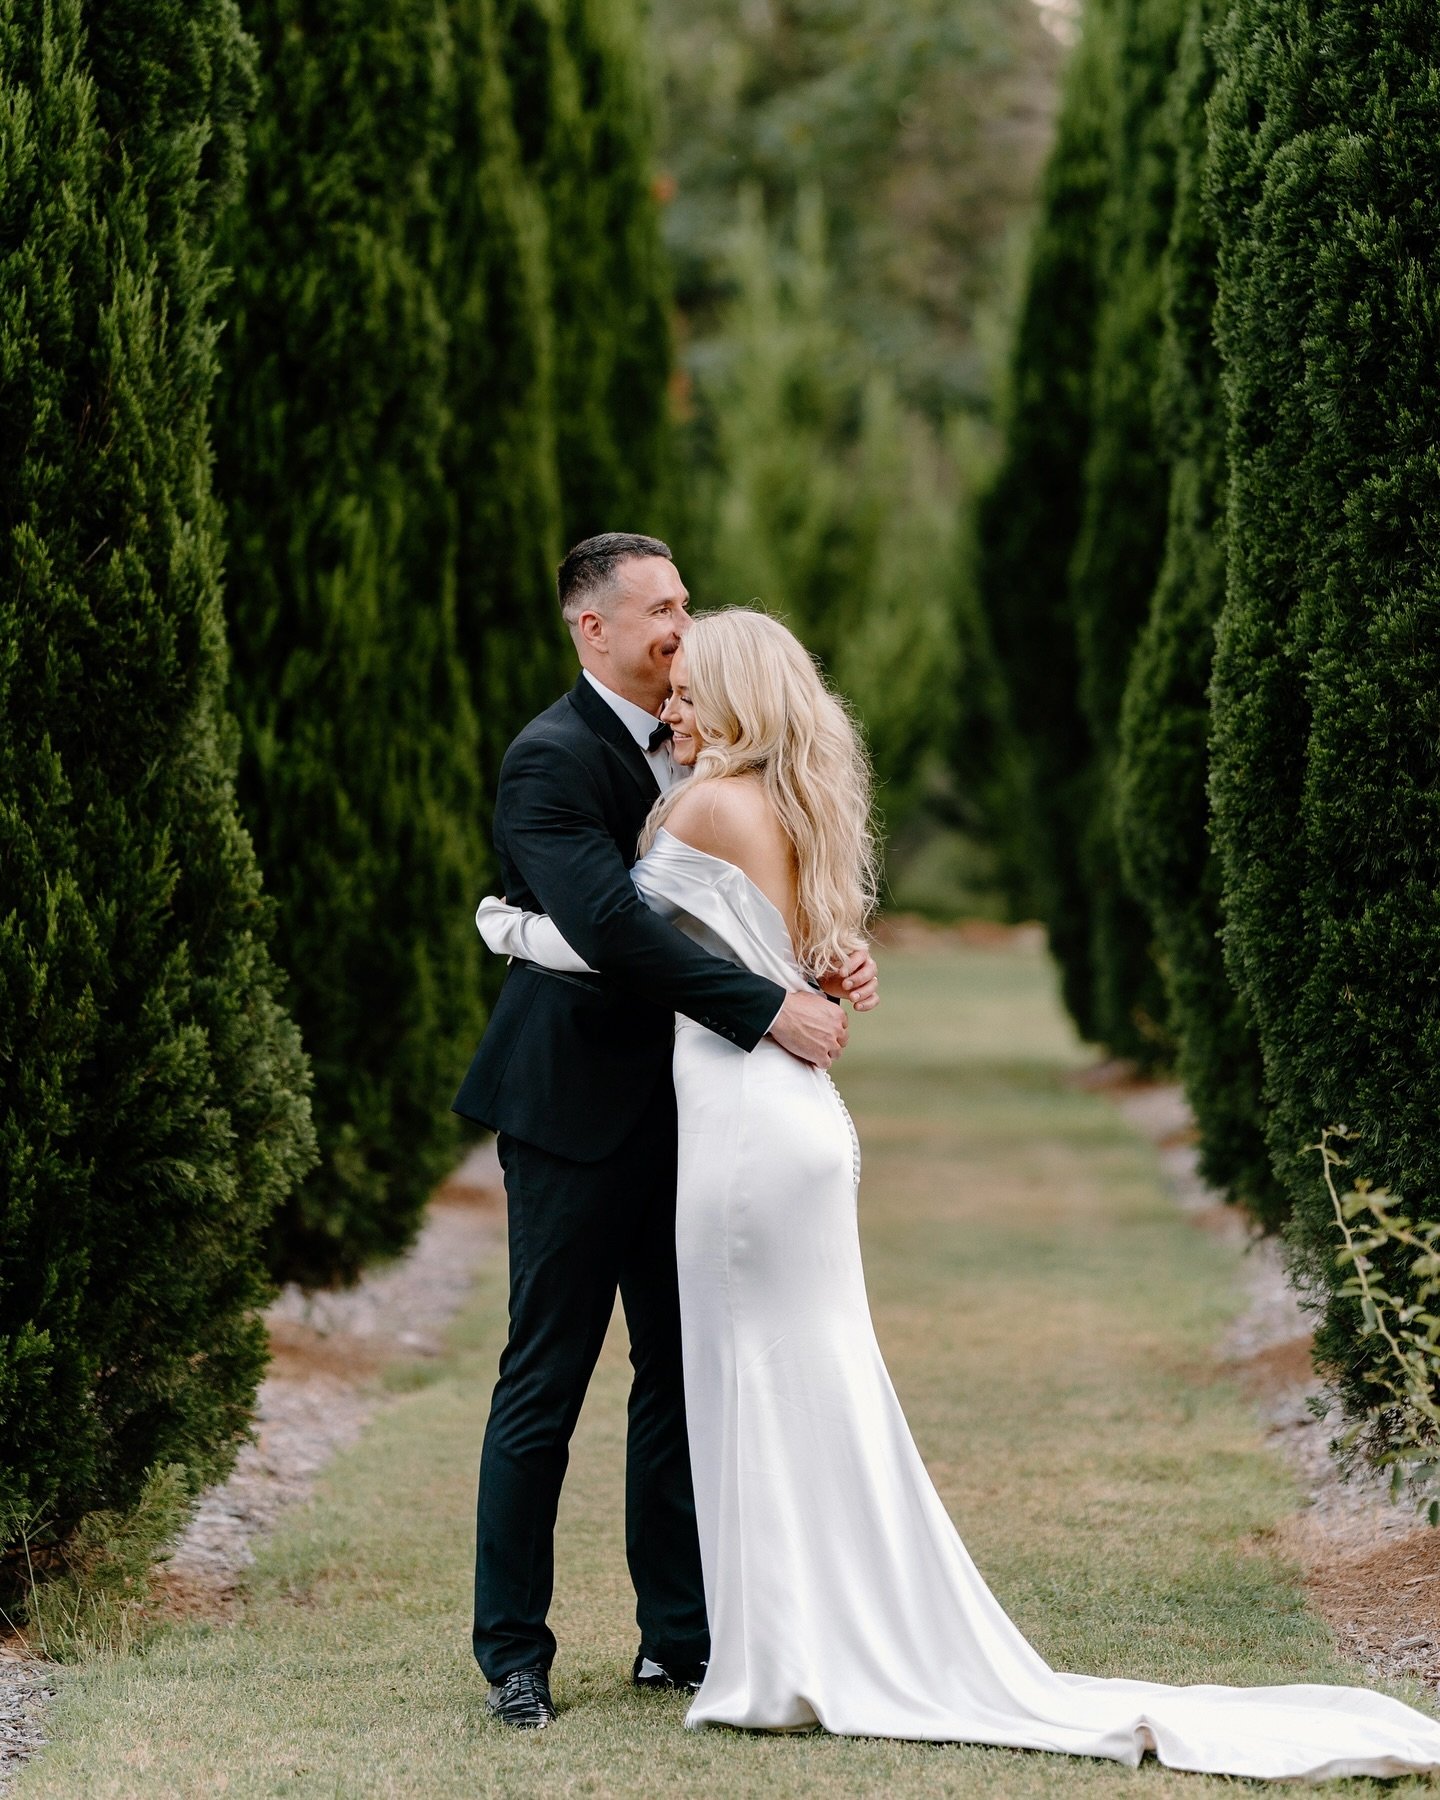 The gorgeous Madeline &amp; Lachlan as seen in Vogue 🤍⁣
⁣
Photography @for_modernromantics⁣
Venue @redleafwollombi ⁣
Madeline Dressed By @corston_couture ⁣
Hair + Makeup @chicartistry @kaylah.makeup ⁣
Styling + Florals @jademcintoshflowers ⁣
Wedding